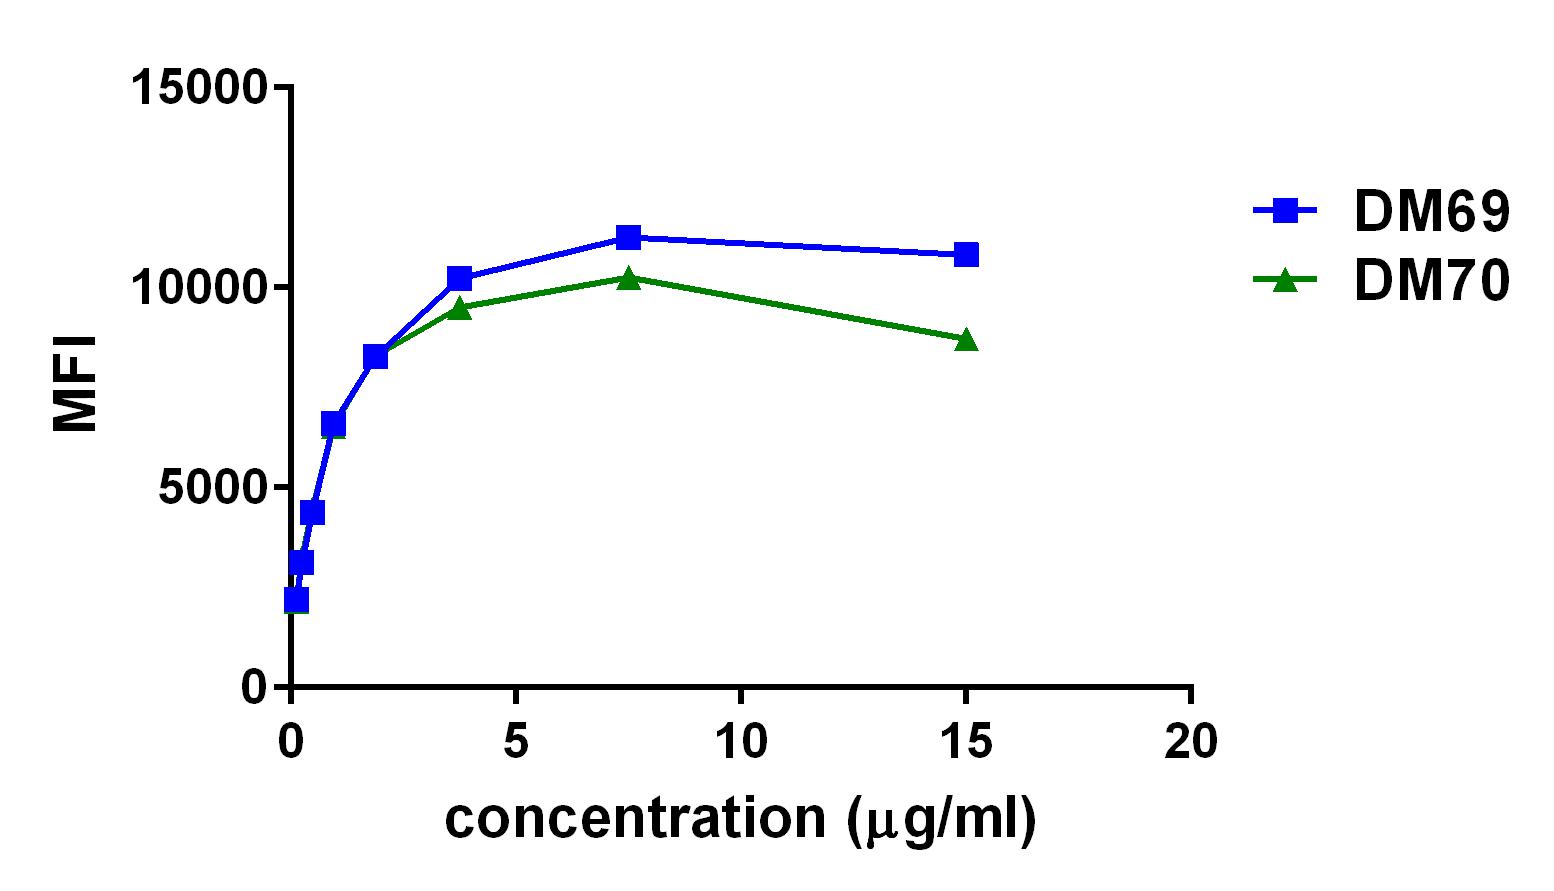 Figure 4. Affinity ranking of different Rabbit anti-2B4 mAb clones by titration of different concentration onto THP-1 cells. The Y-axis represents the mean fluorescence intensity (MFI) while the X-axis represents the concentration of IgG used.